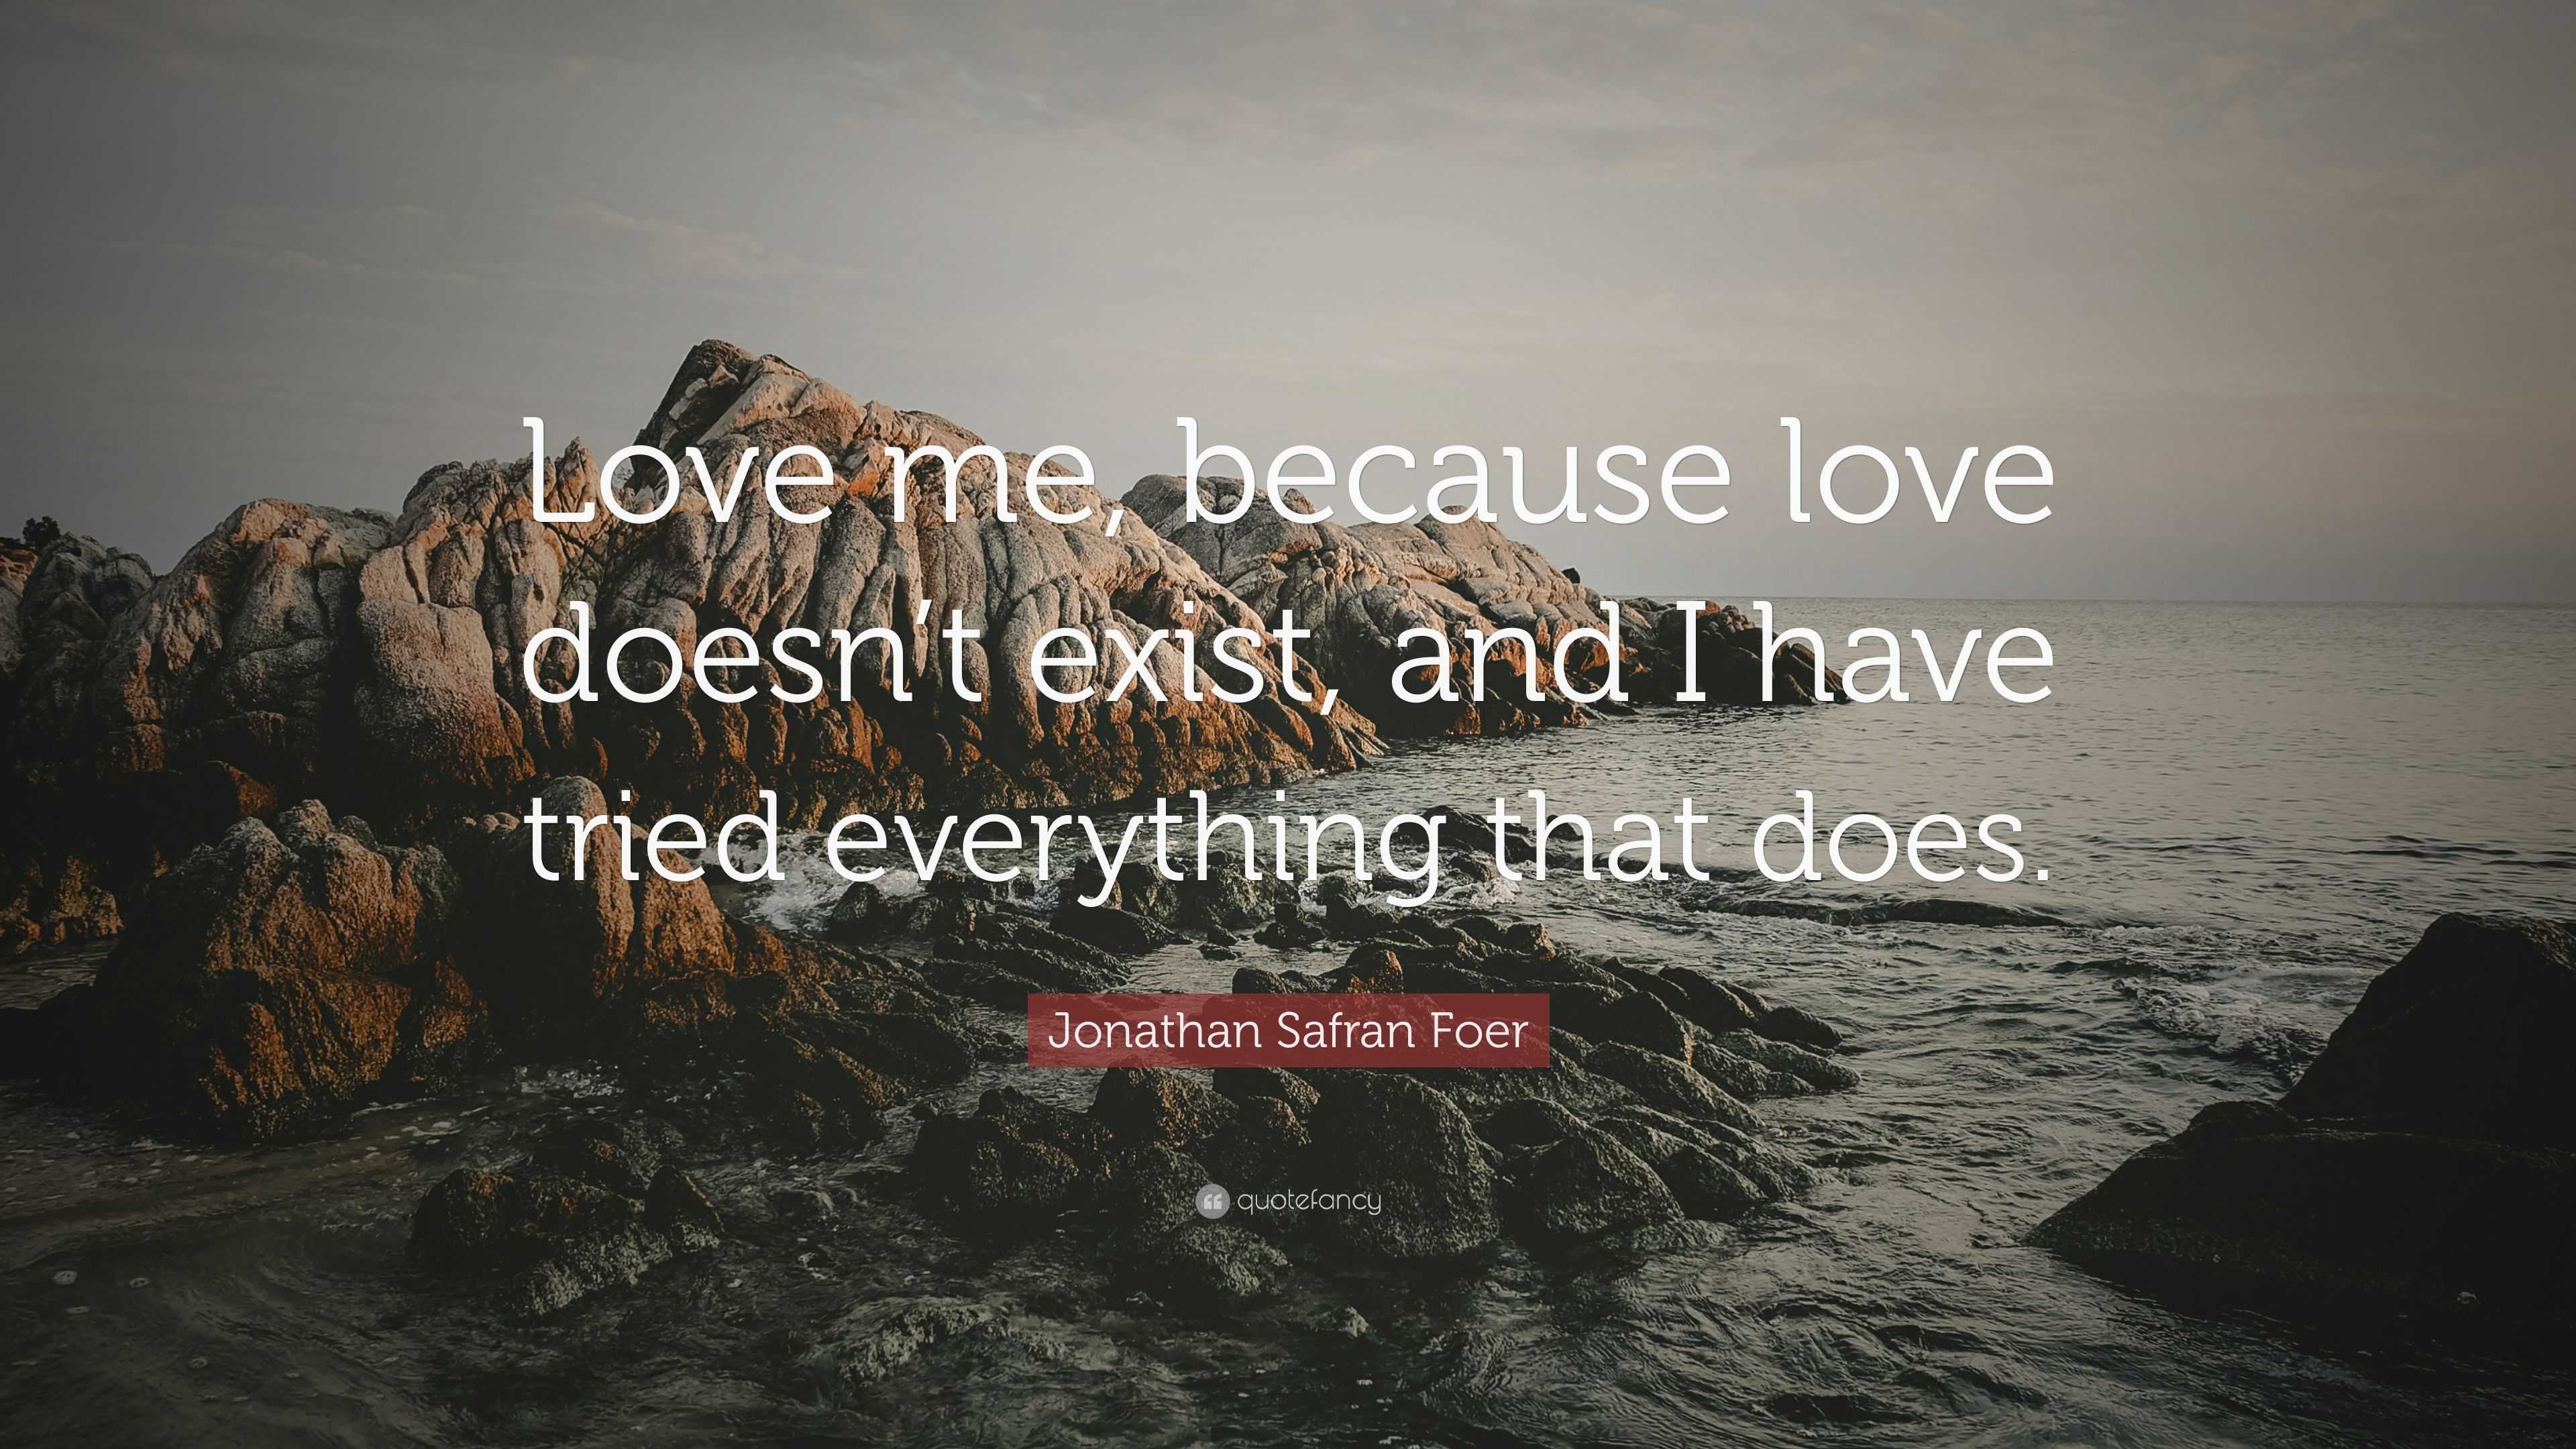 Jonathan Safran Foer Quote: “Love me, because love doesn’t exist, and I ...